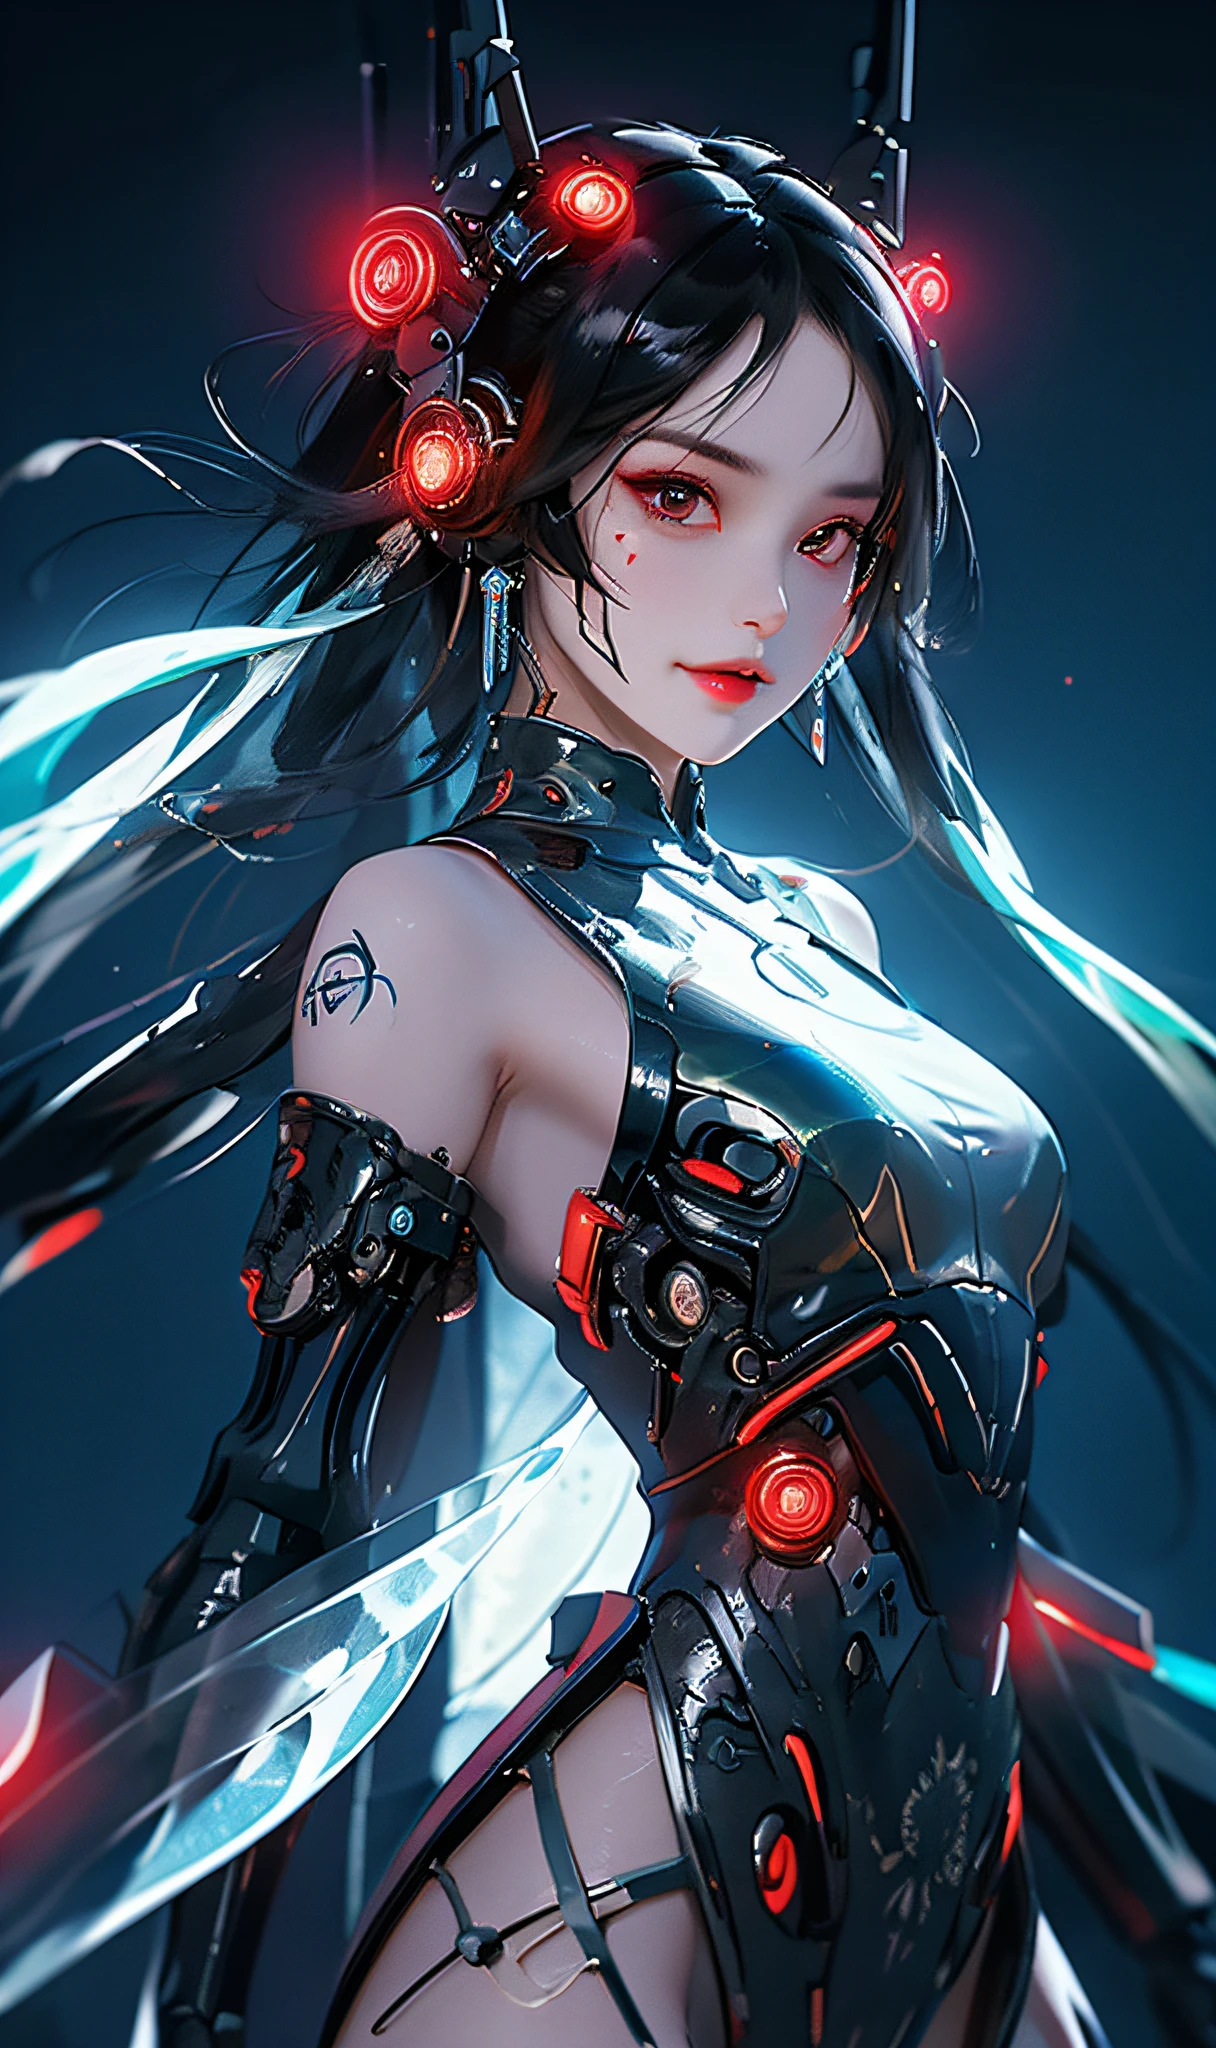 1 girl, Chinese_clothes, liquid black titanium and red, cyberhan, cheongsam, cyberpunk city, dynamic pose, detailed luminous headphones, luminous hair accessories, long hair, luminous earrings, luminous necklace, cyberpunk, high-tech city, full of mechanical and futuristic elements, futuristic, technology, glowing neon, red, red light, transparent black tulle, black ribbon, laser, digital background urban sky, big moon, with vehicles, best quality, masterpiece, 8K, character edge light, Super high detail, high quality, the most beautiful woman in human beings, smiling slightly, face facing front and left and right symmetry, ear decoration, beautiful pupils, light effects, visual data, dark black hair, super detailed facial texture, bright leather red gloves, elevation angle shooting